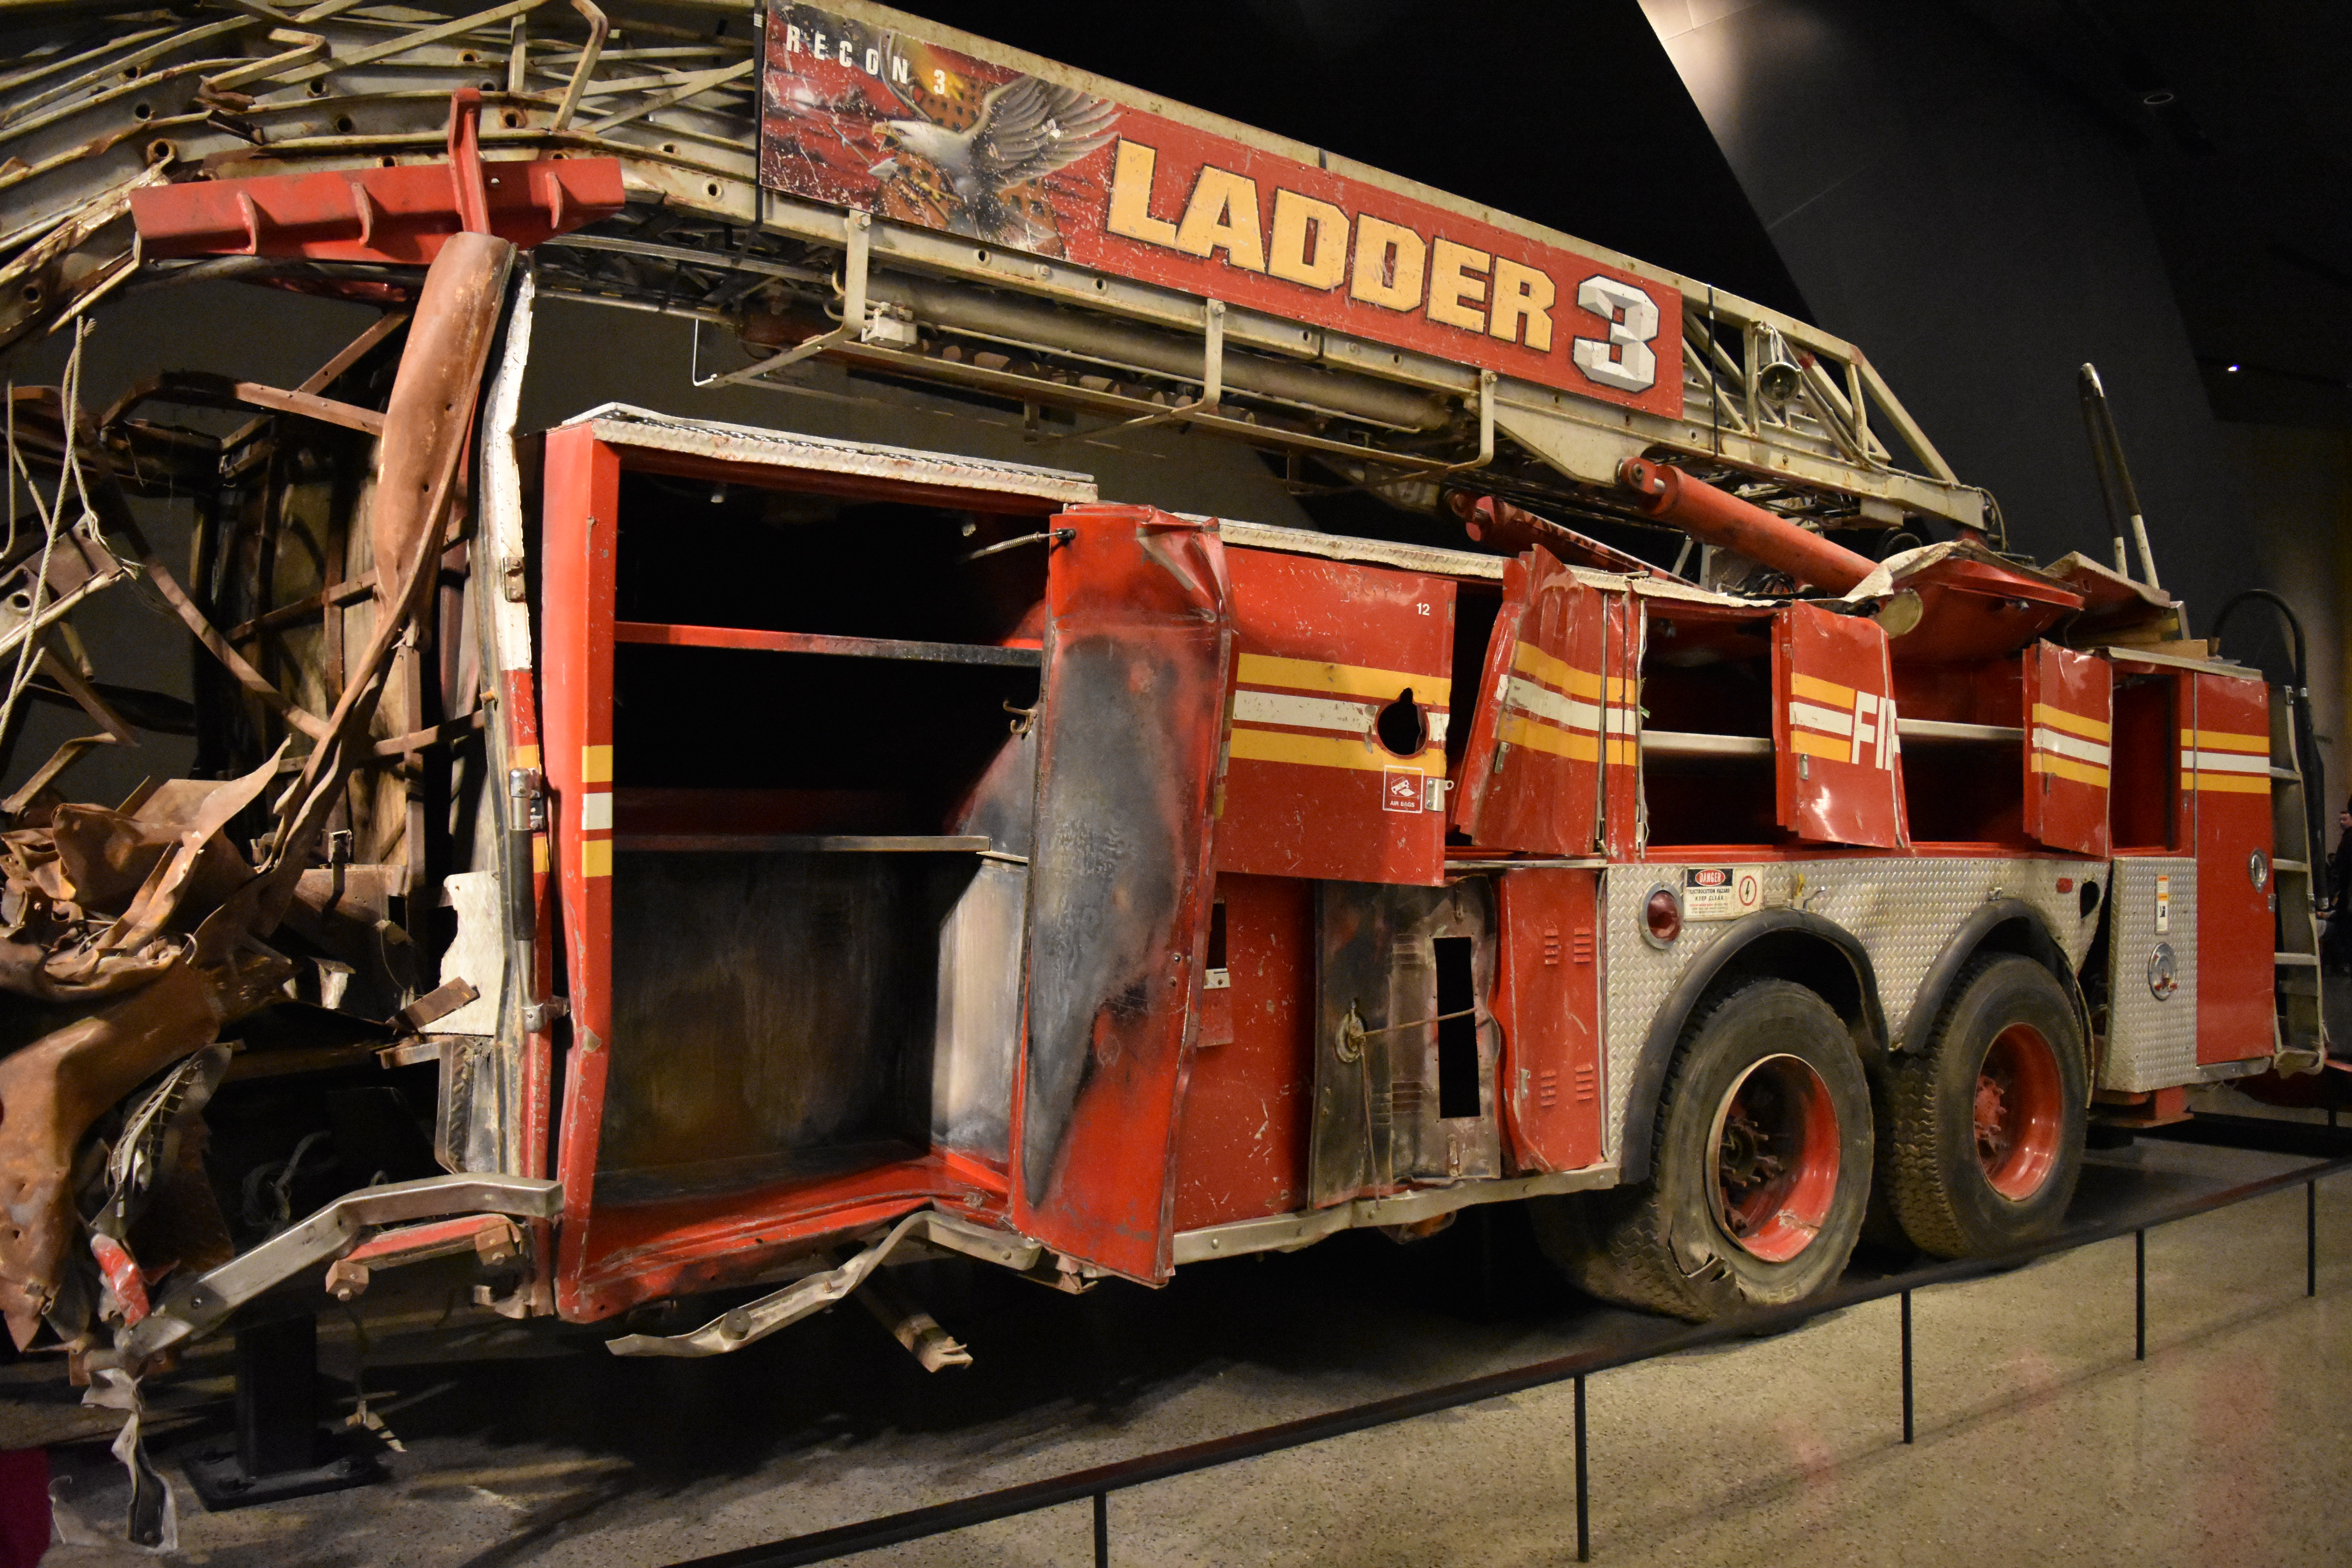 Fire Truck From Ladder 3 from 9/11